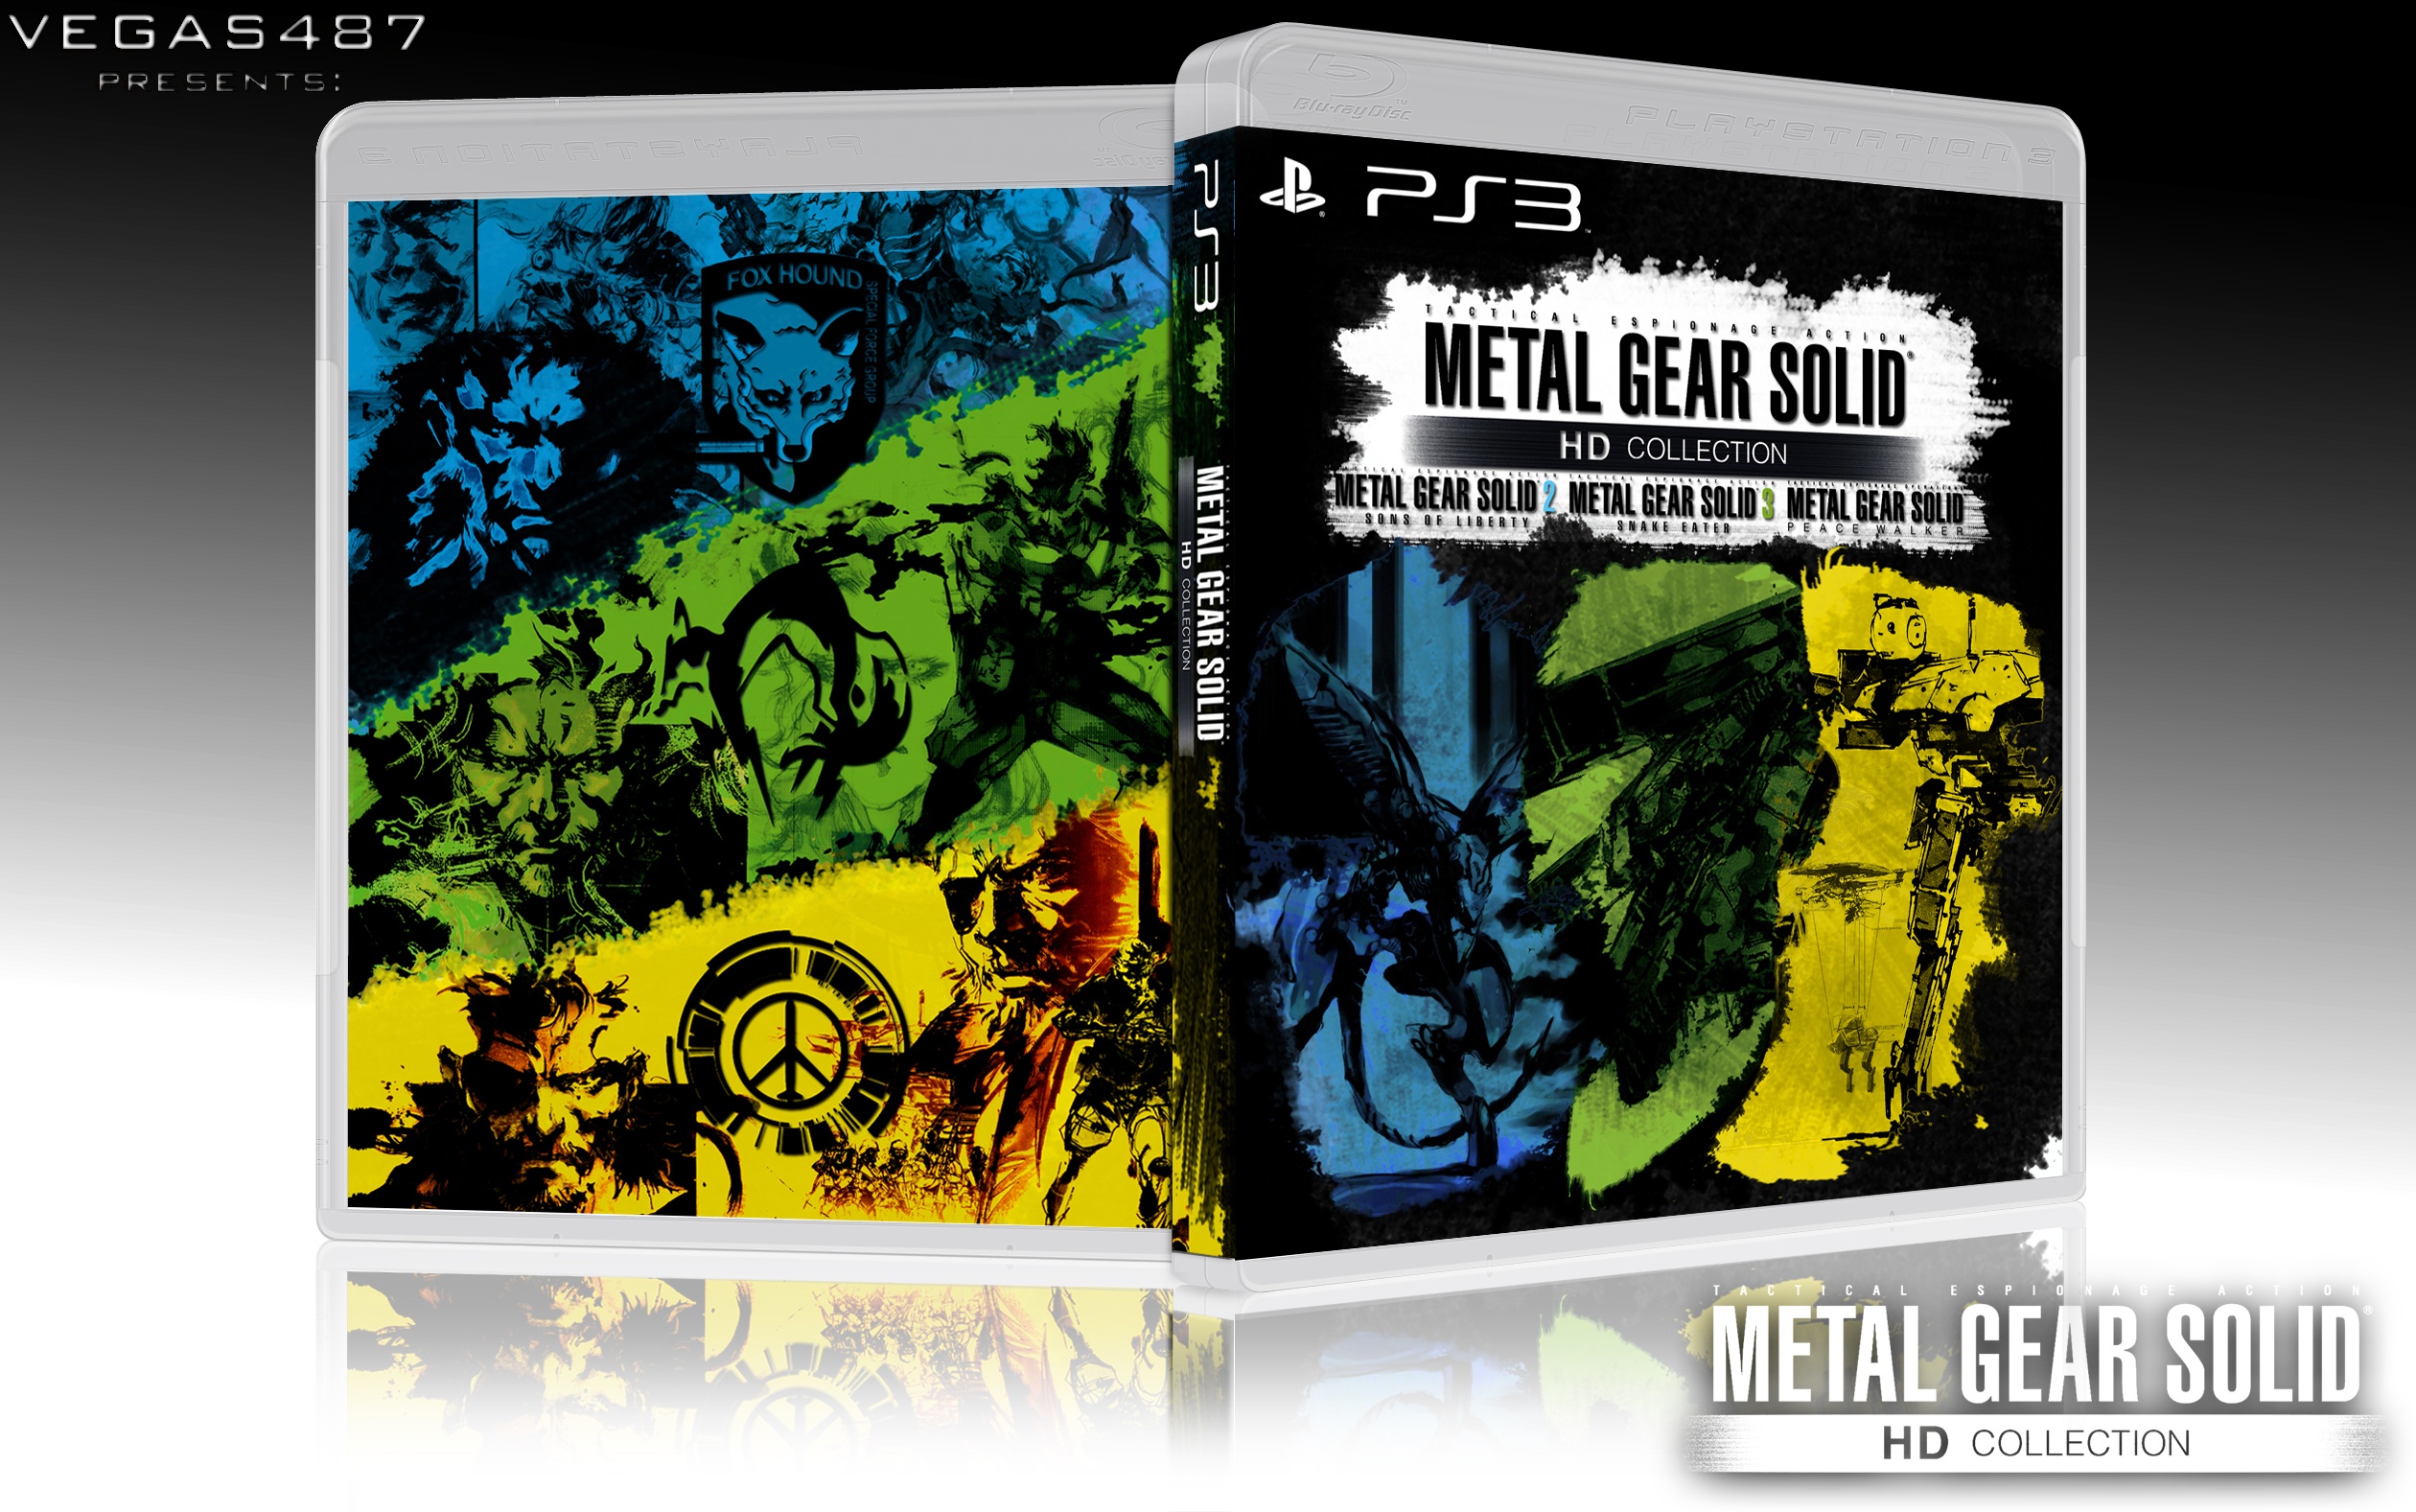 Metal Gear Solid HD Collection box cover